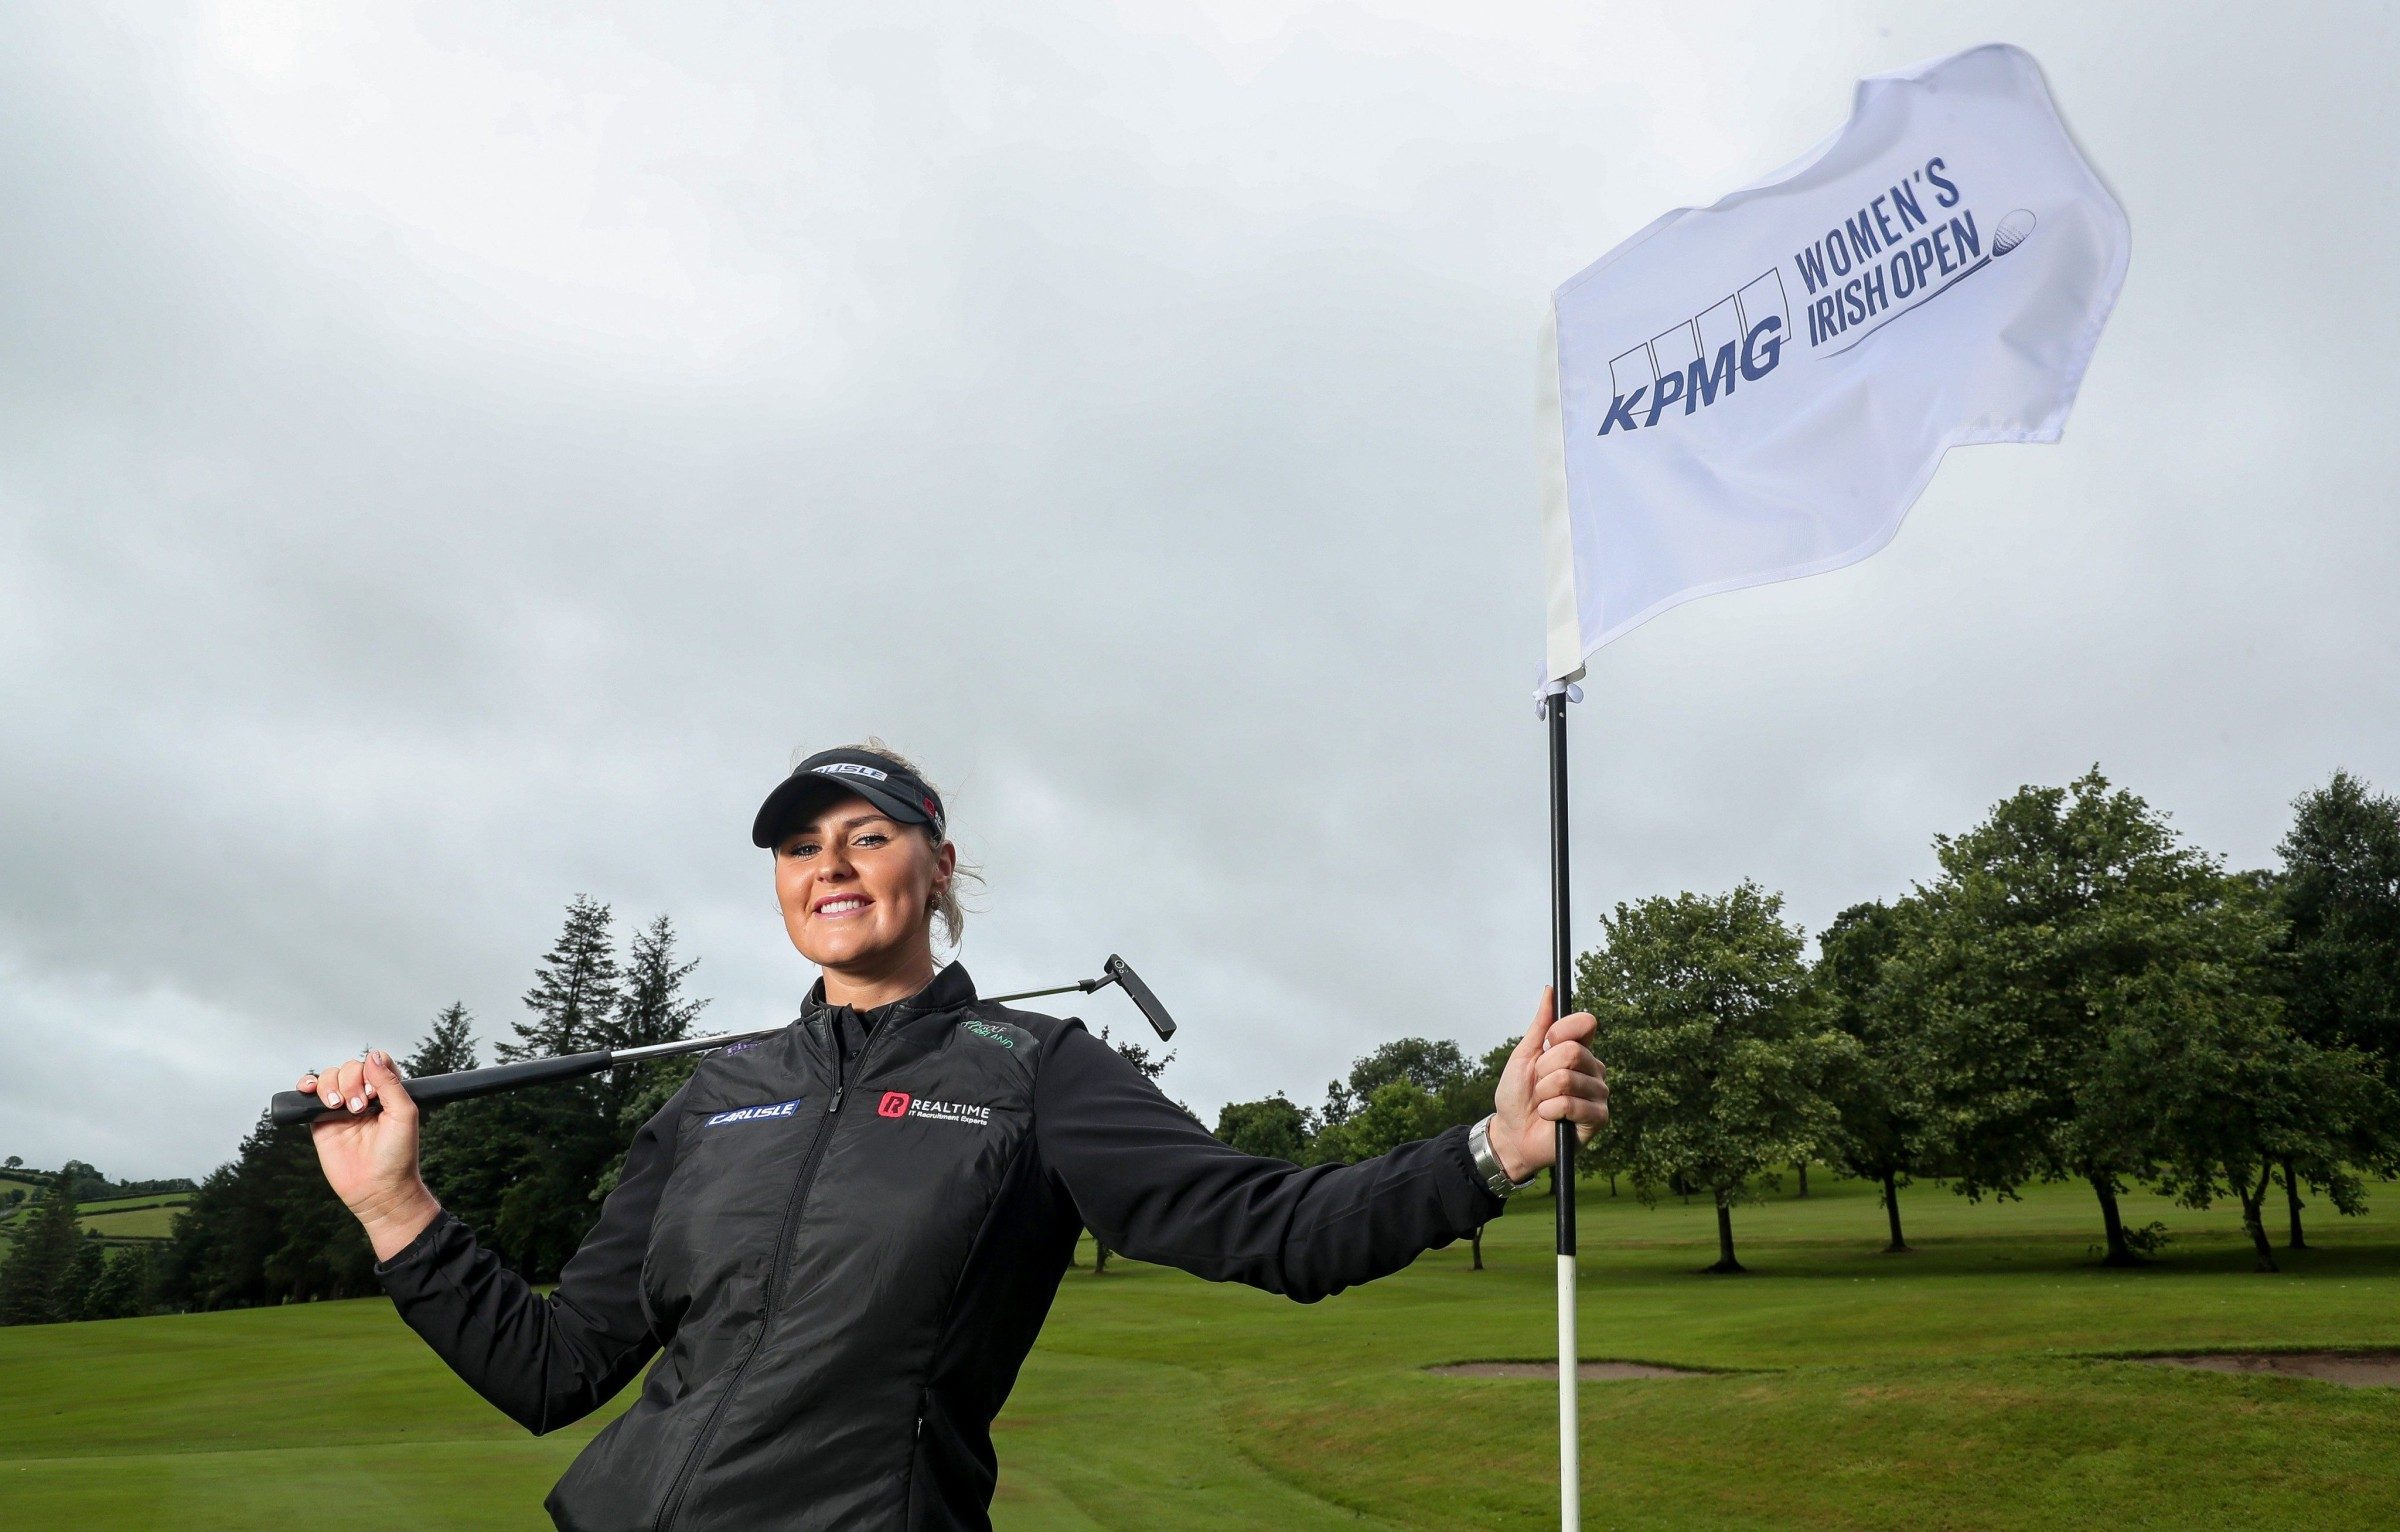 KPMG ANNOUNCED AS TITLE SPONSOR OF THE WOMEN’S IRISH OPEN FOR THE NEXT THREE YEARS AHEAD OF ITS HISTORIC RETURN IN SEPTEMBER